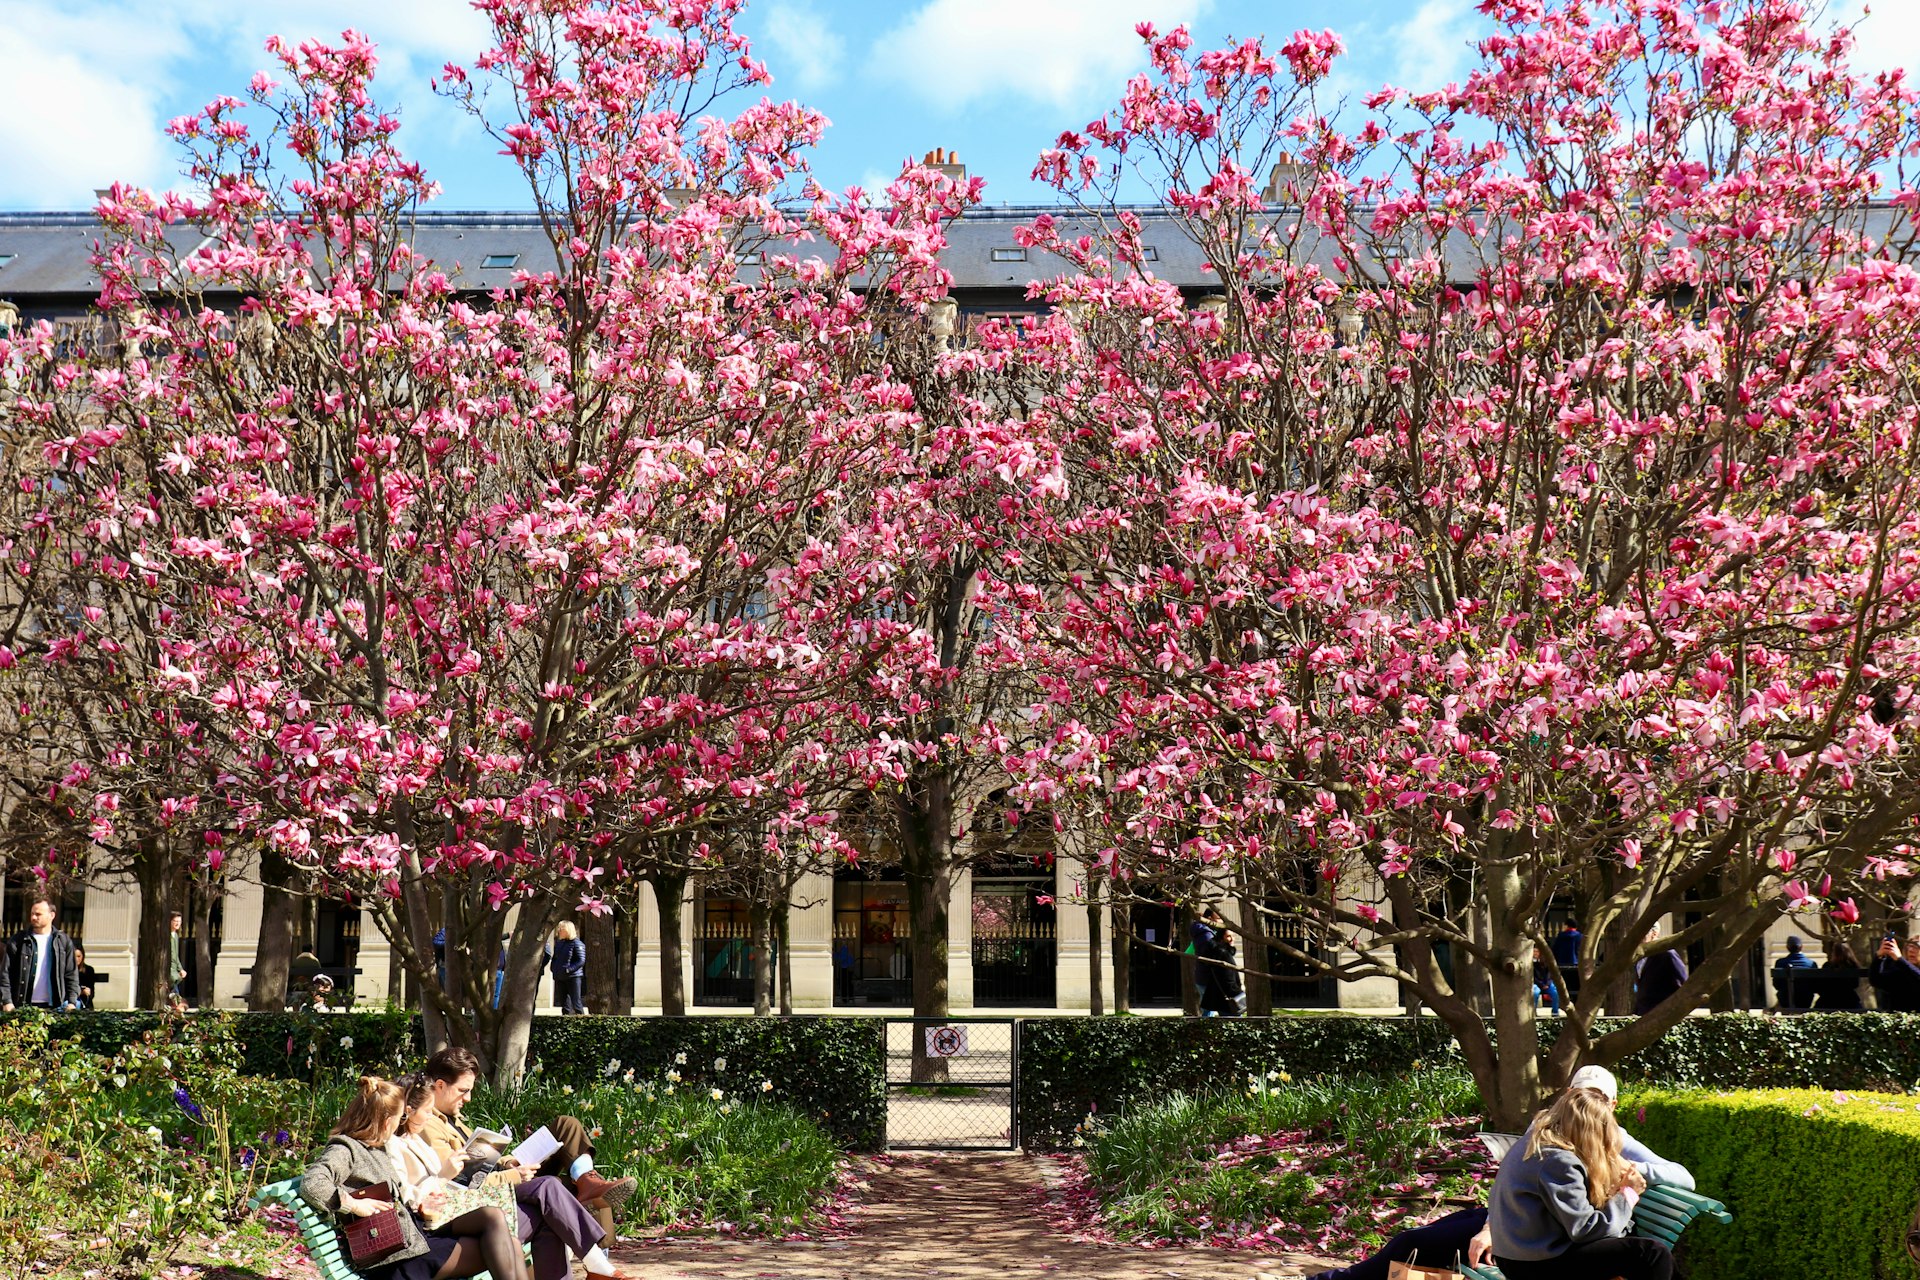 People sit on benches under blossoming magnolia trees in a park